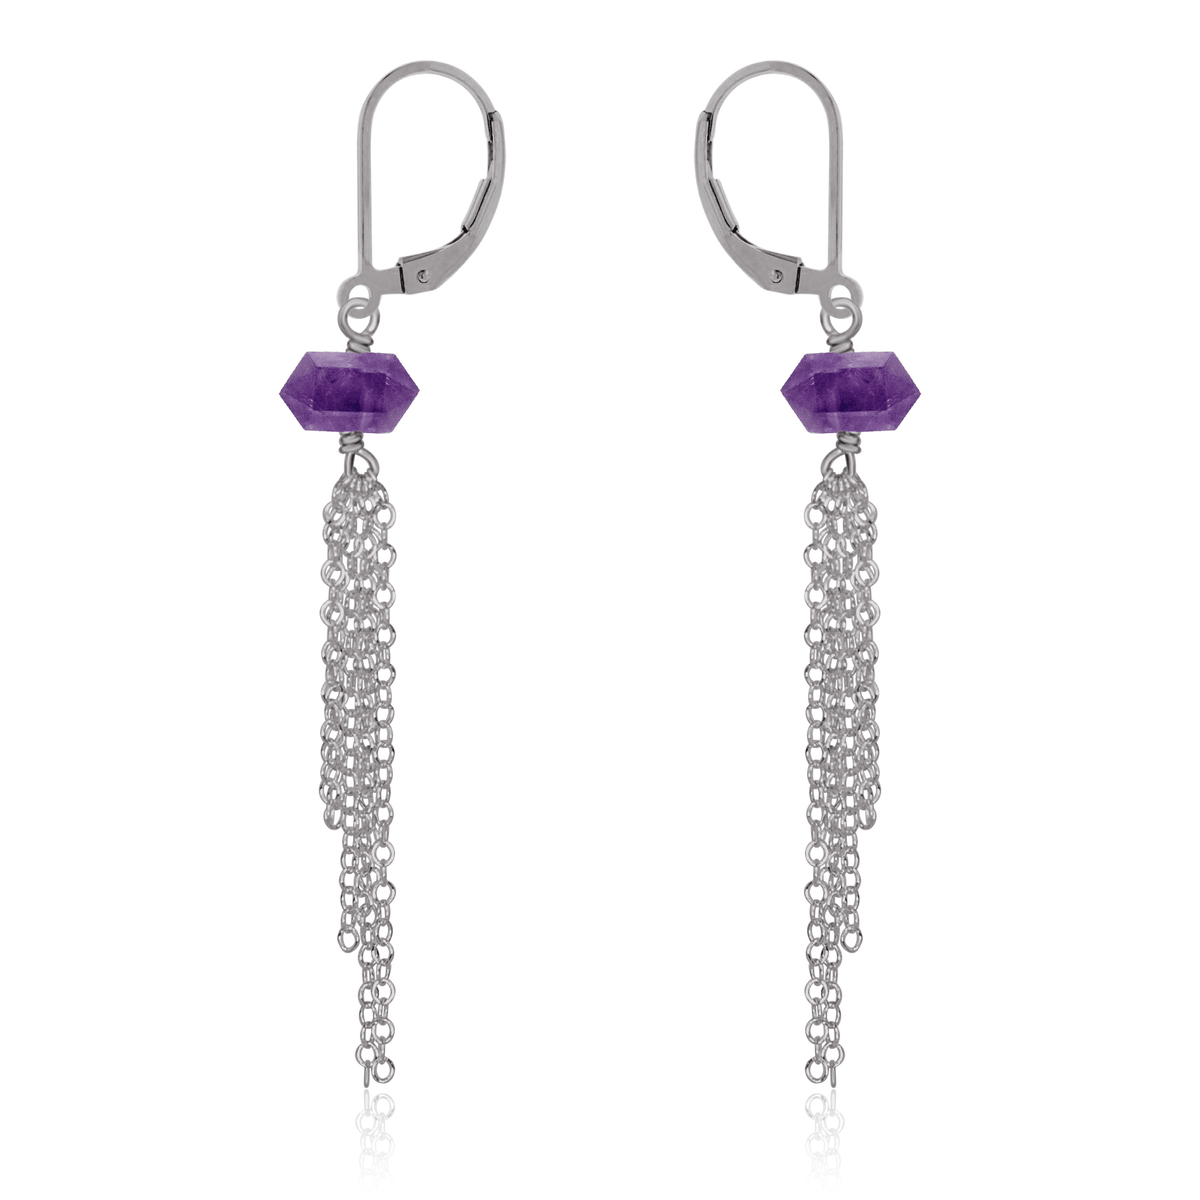 Amethyst Double Terminated Crystal Point Tassel Earrings - Amethyst Double Terminated Crystal Point Tassel Earrings - Stainless Steel - Luna Tide Handmade Crystal Jewellery